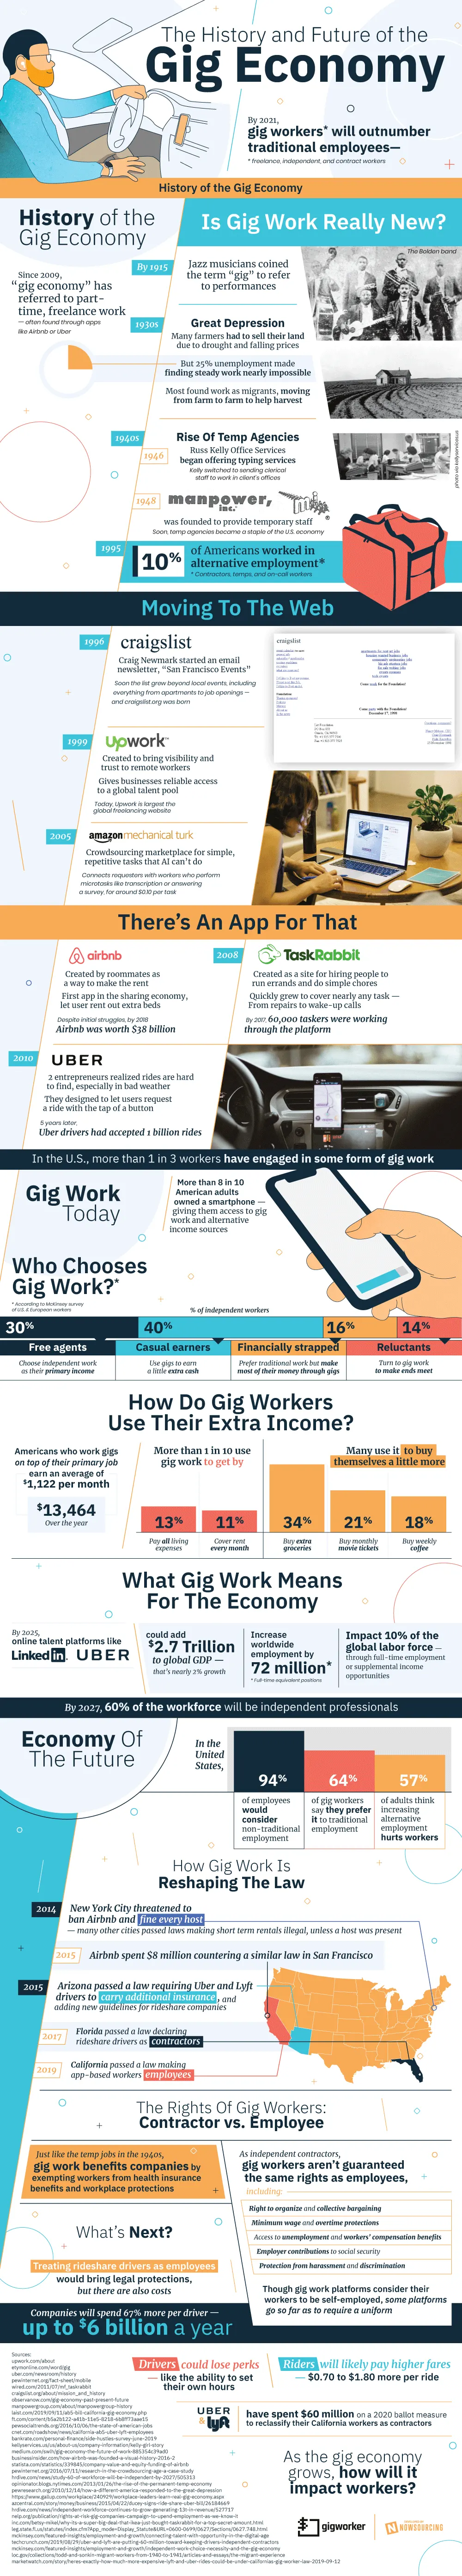 The History & Future of the Gig Economy